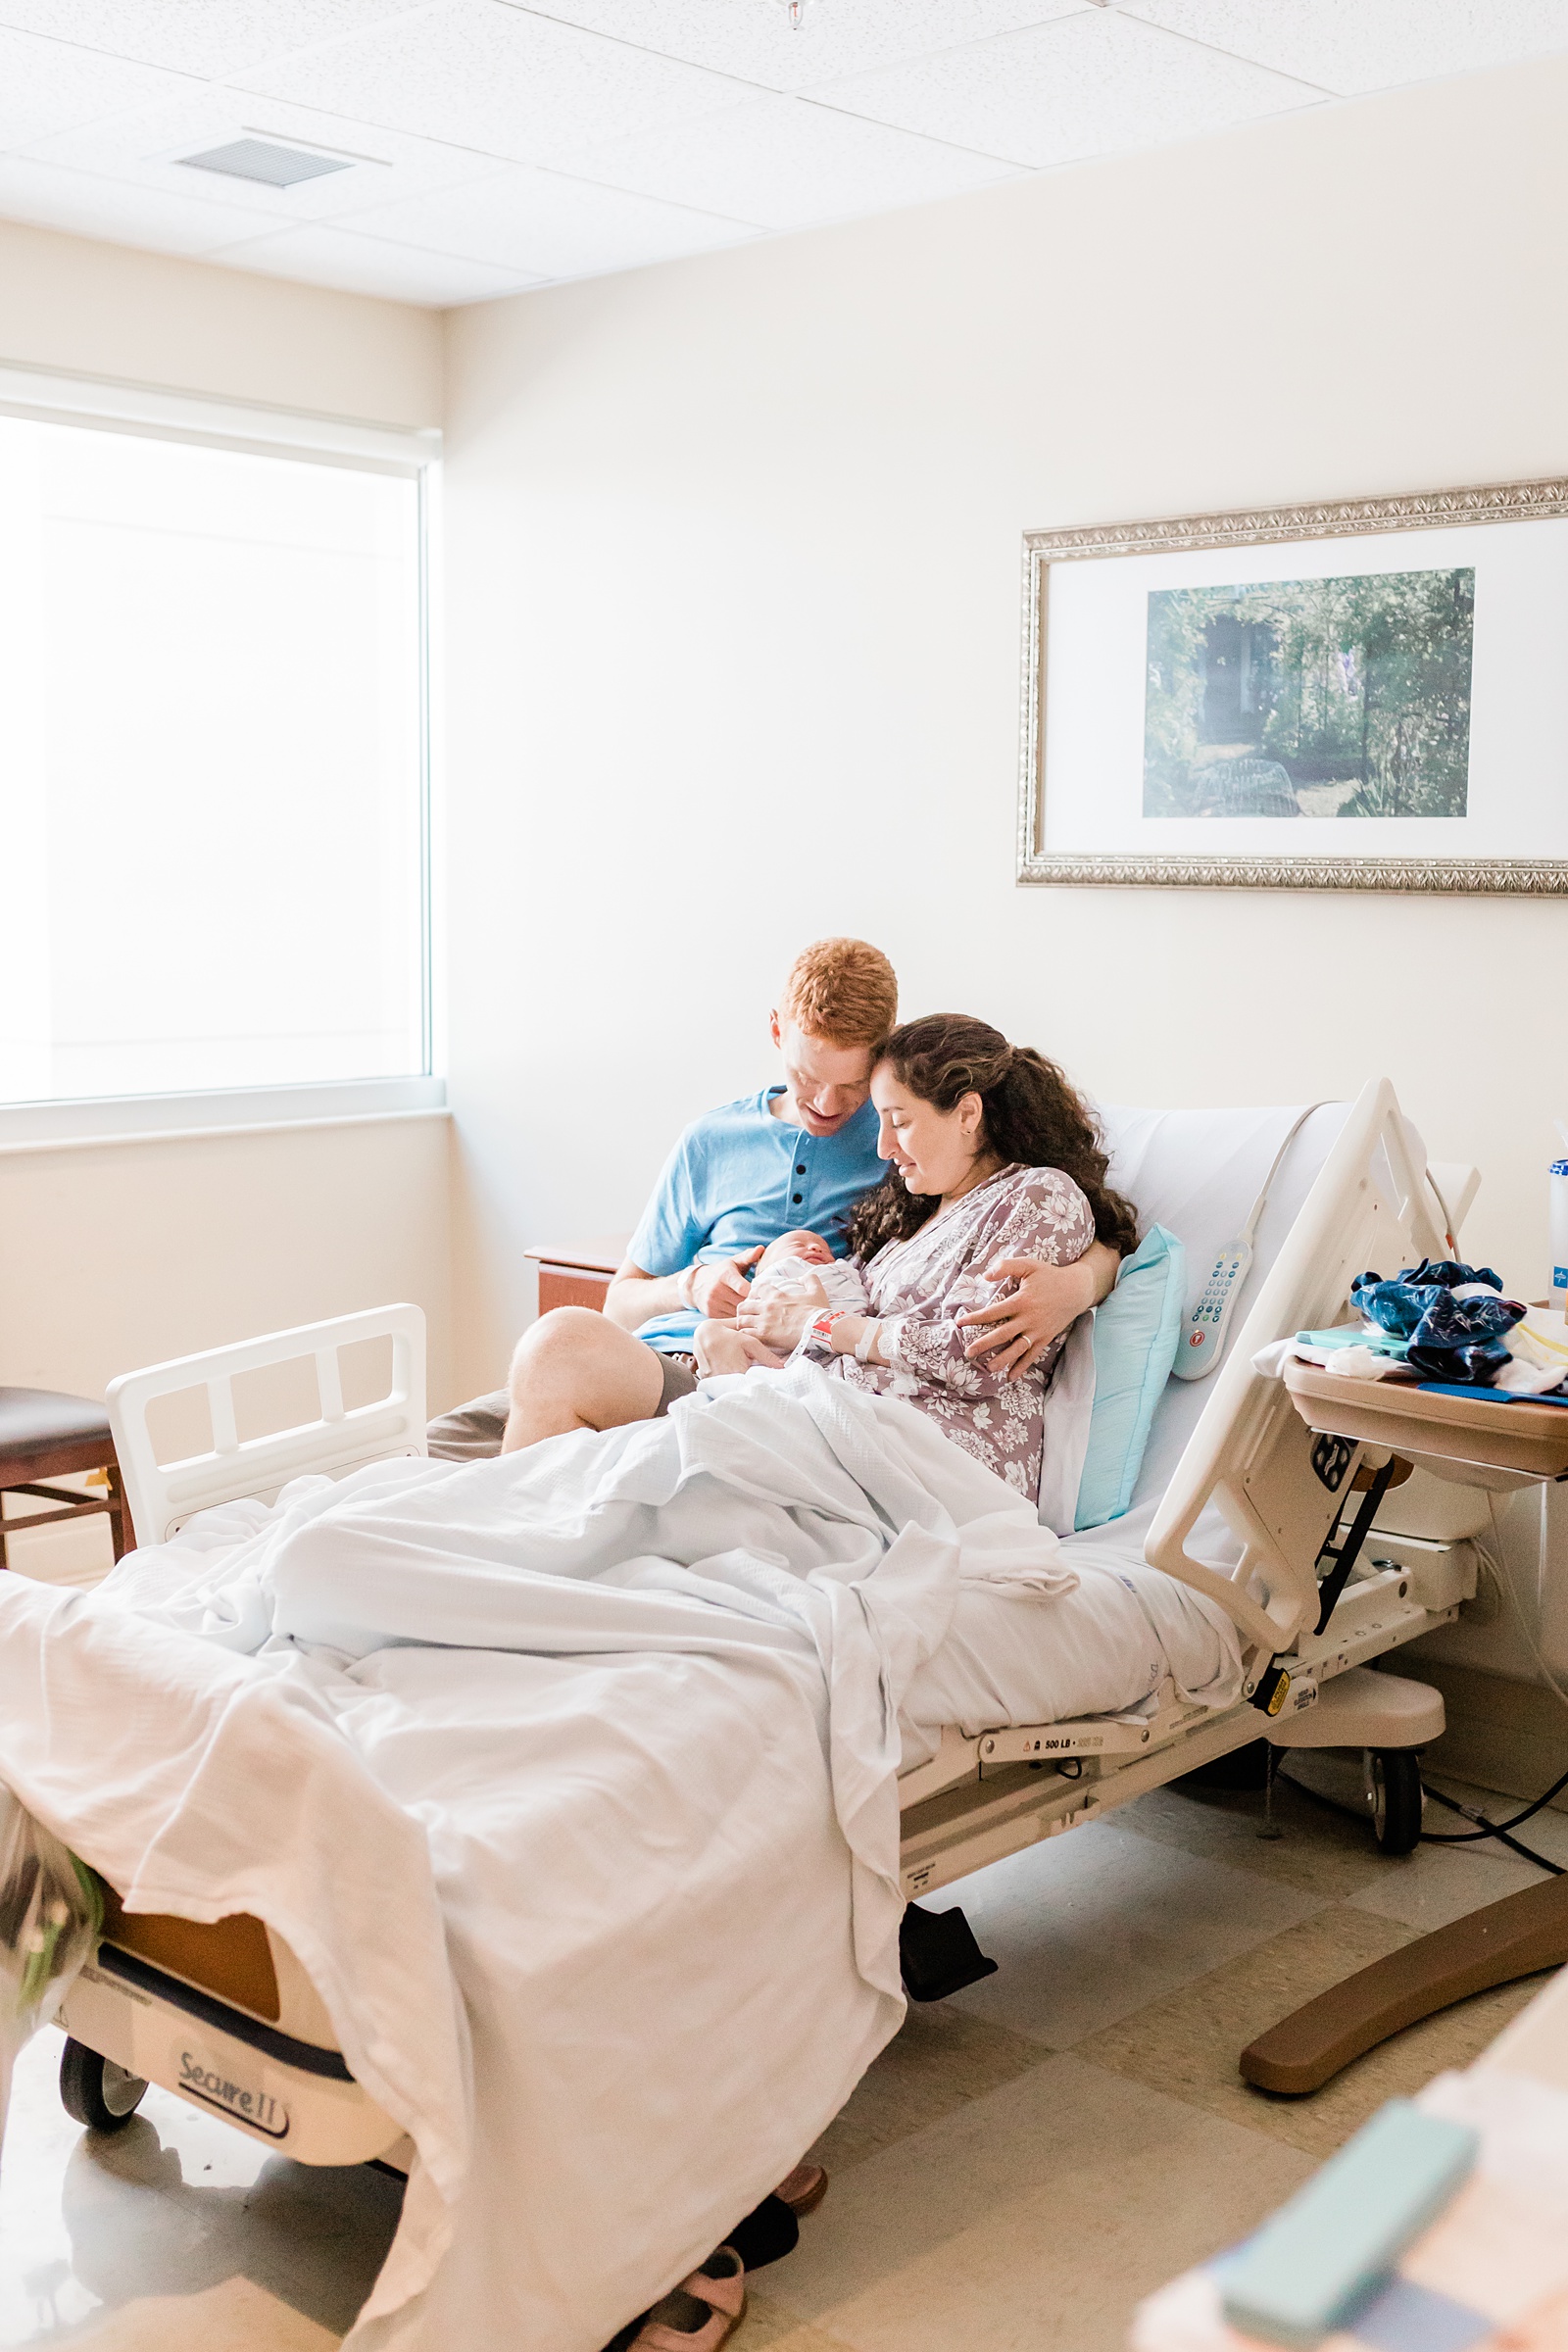 Wide angle photo of parents holding baby in hospital | Caitlyn Motycka Photography